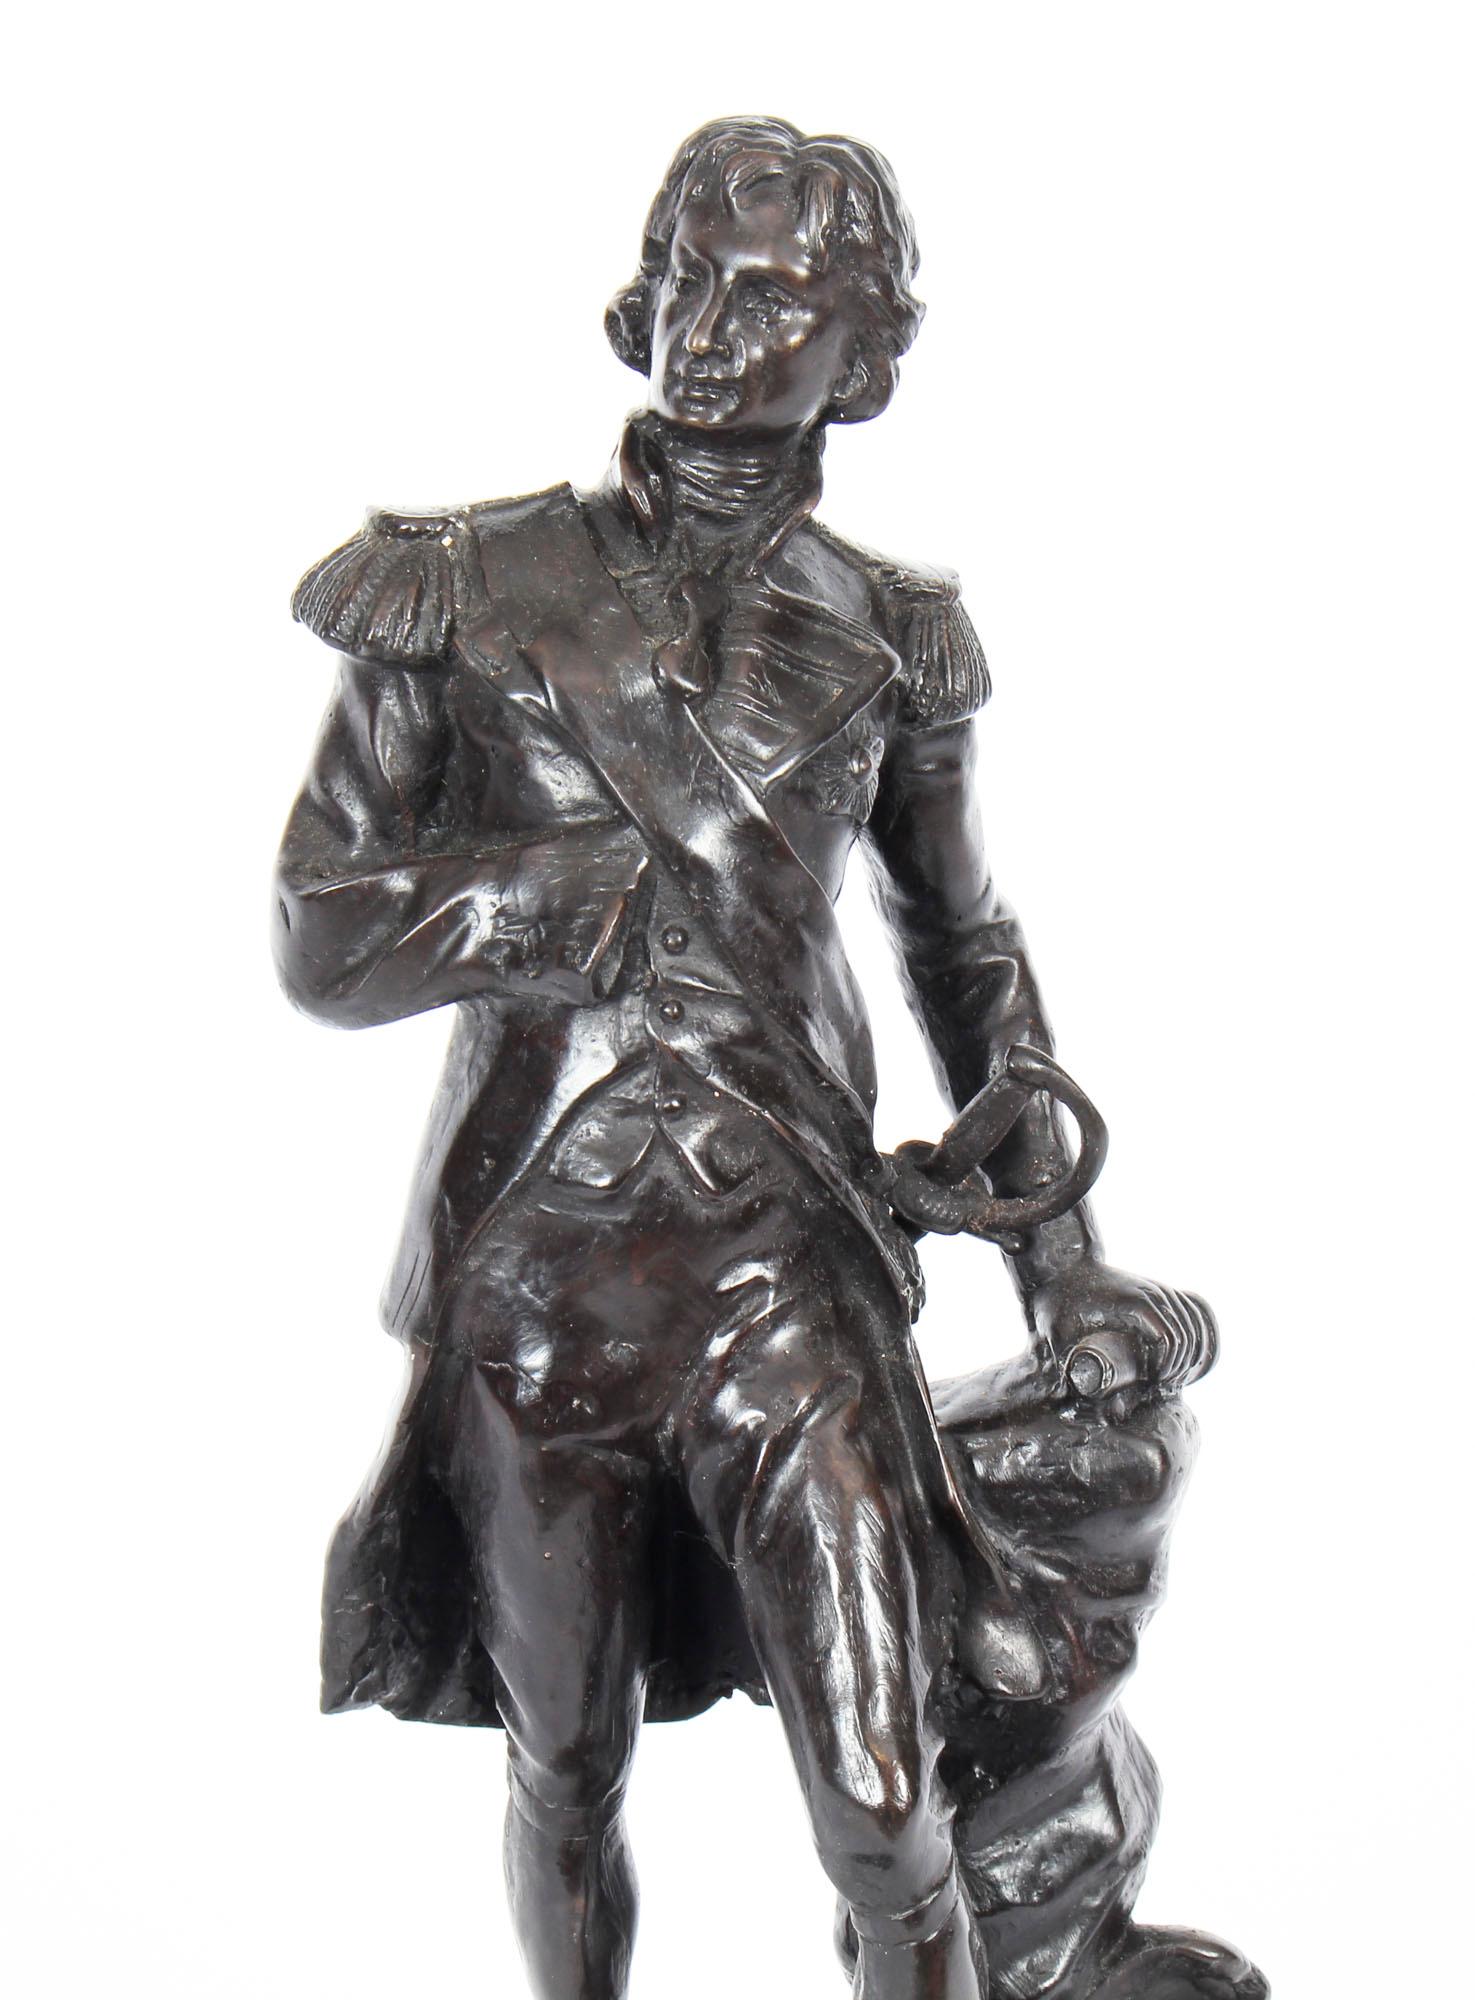 A stunning bronze sculptures of one of Britain's greatest ever military heroes,  dating from the late 20th Century.

On 21 October 1805, the Franco-Spanish fleet came out of port and Admiral Horatio Nelson's fleet engaged them at the Battle of